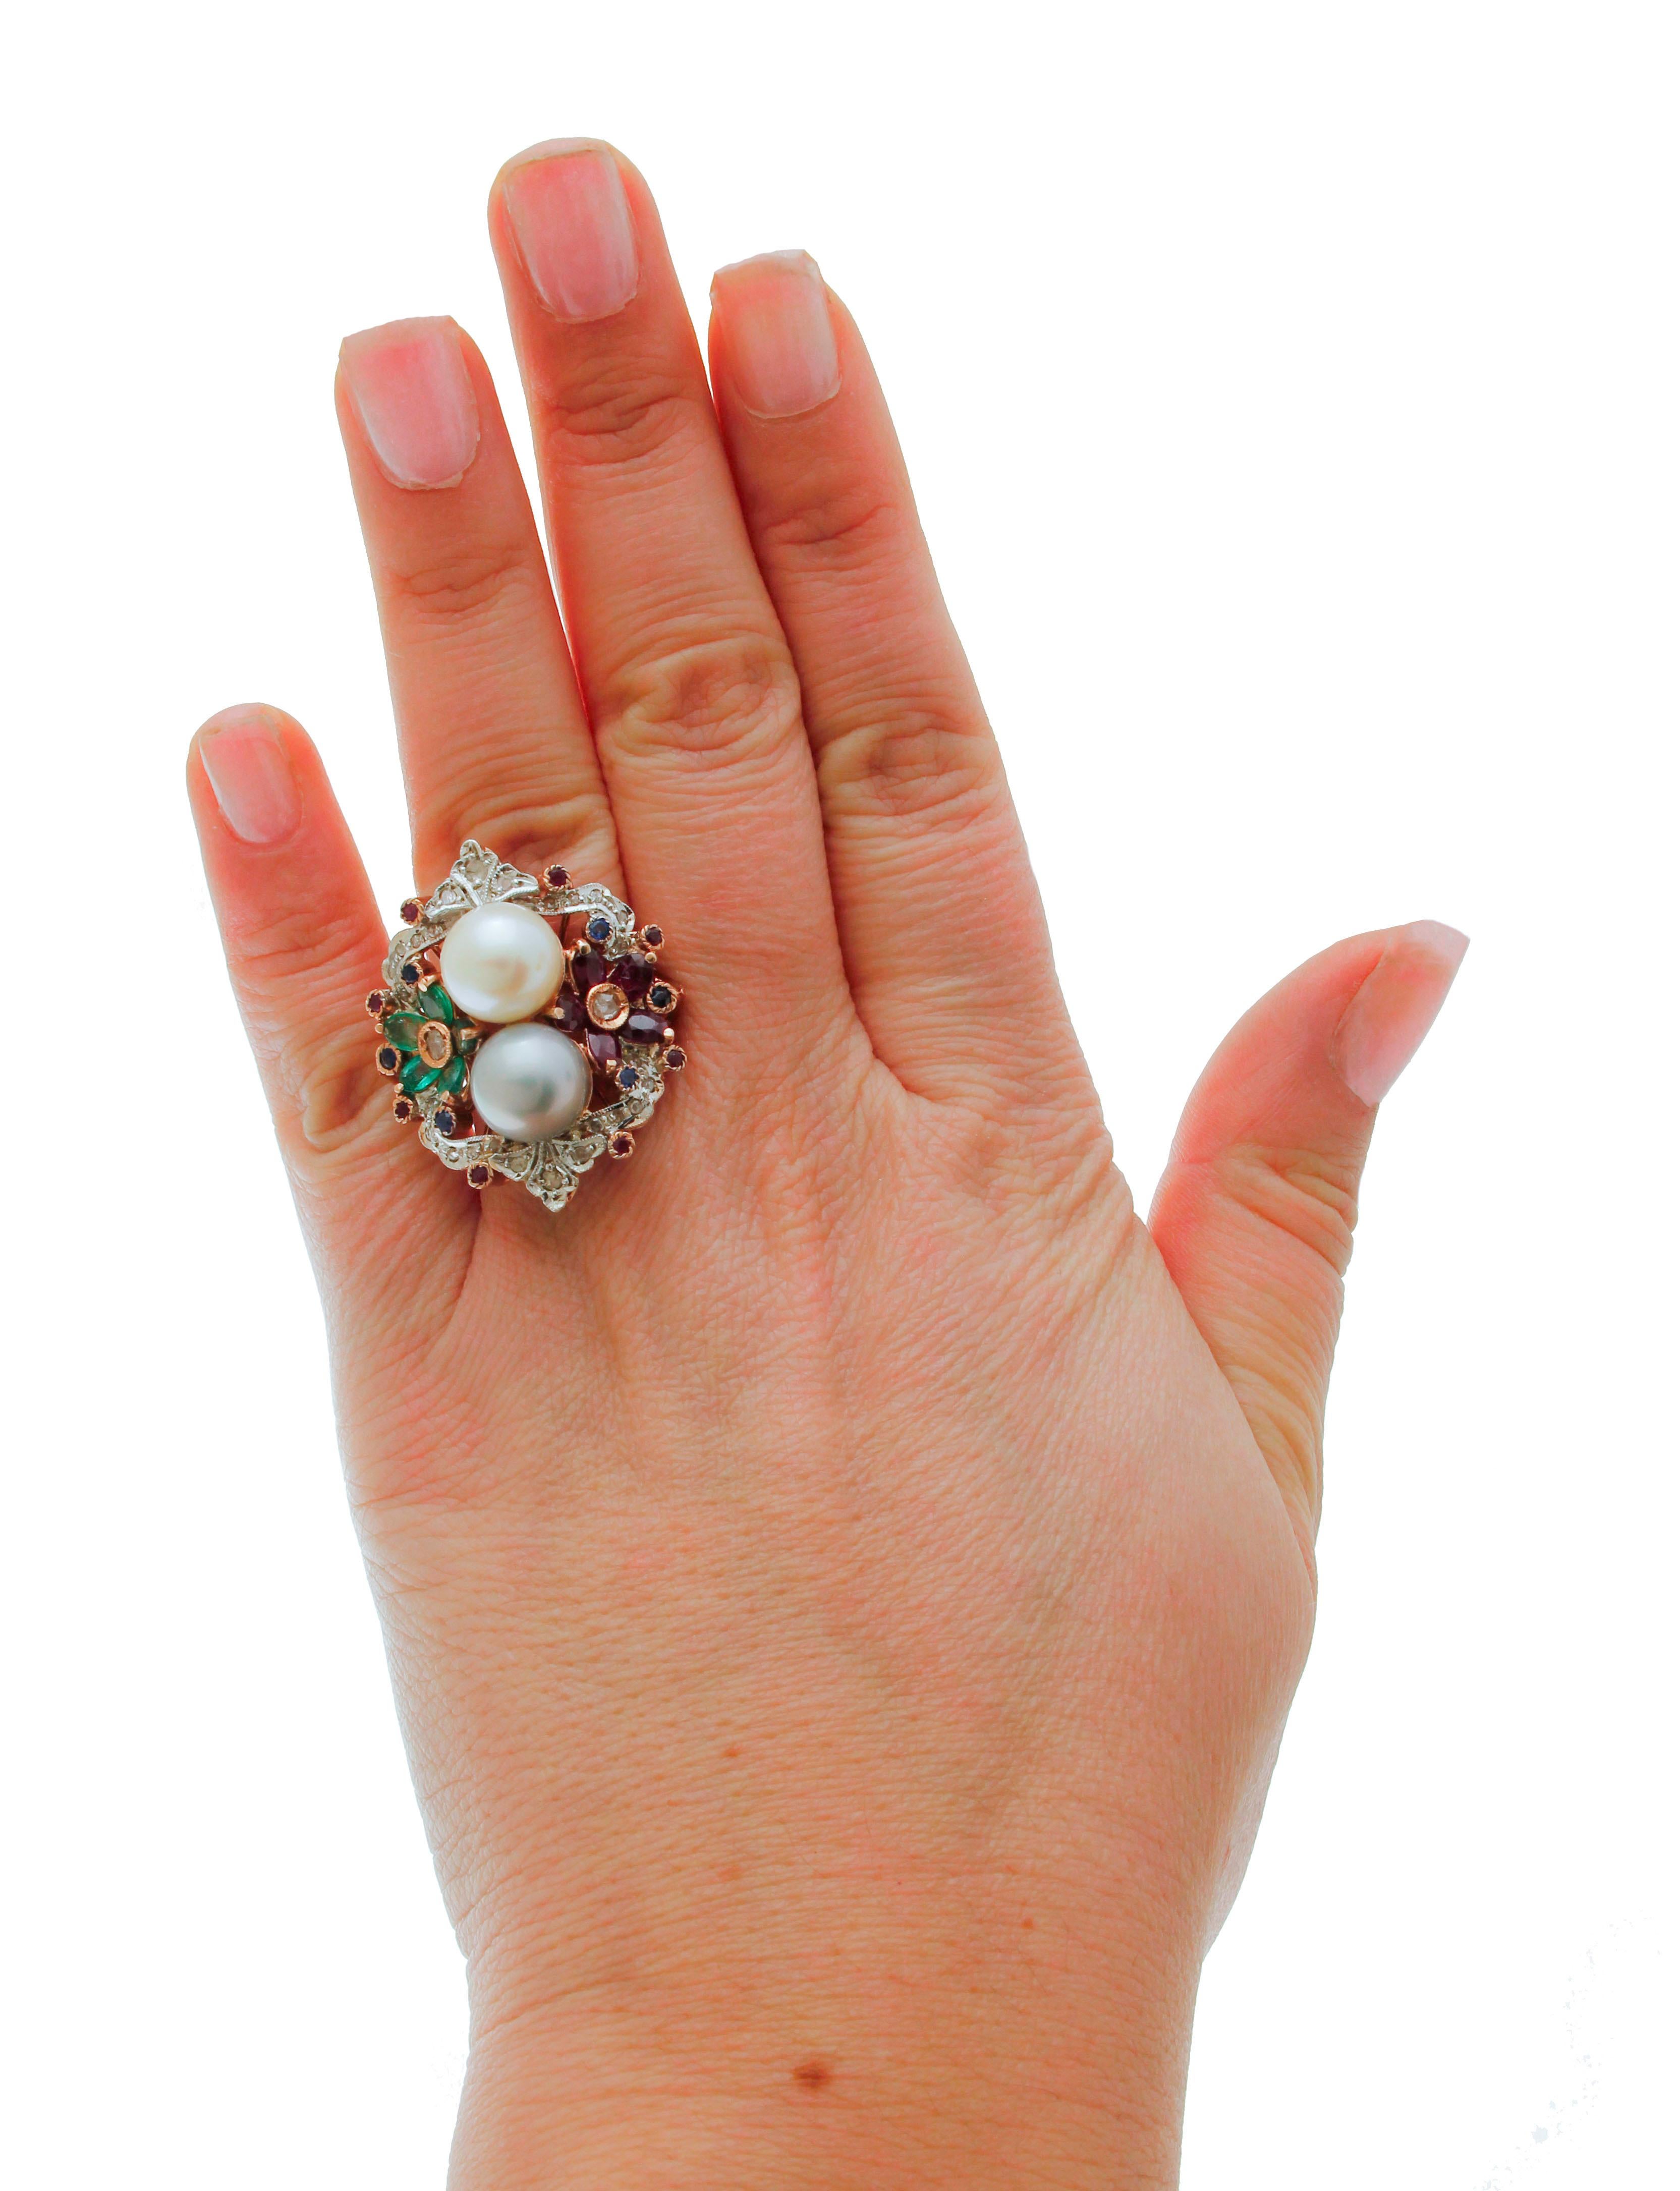 Mixed Cut Diamonds, Rubies, Emeralds, Sapphires, Pearls, 9 Karat Rose Gold and Silver Ring